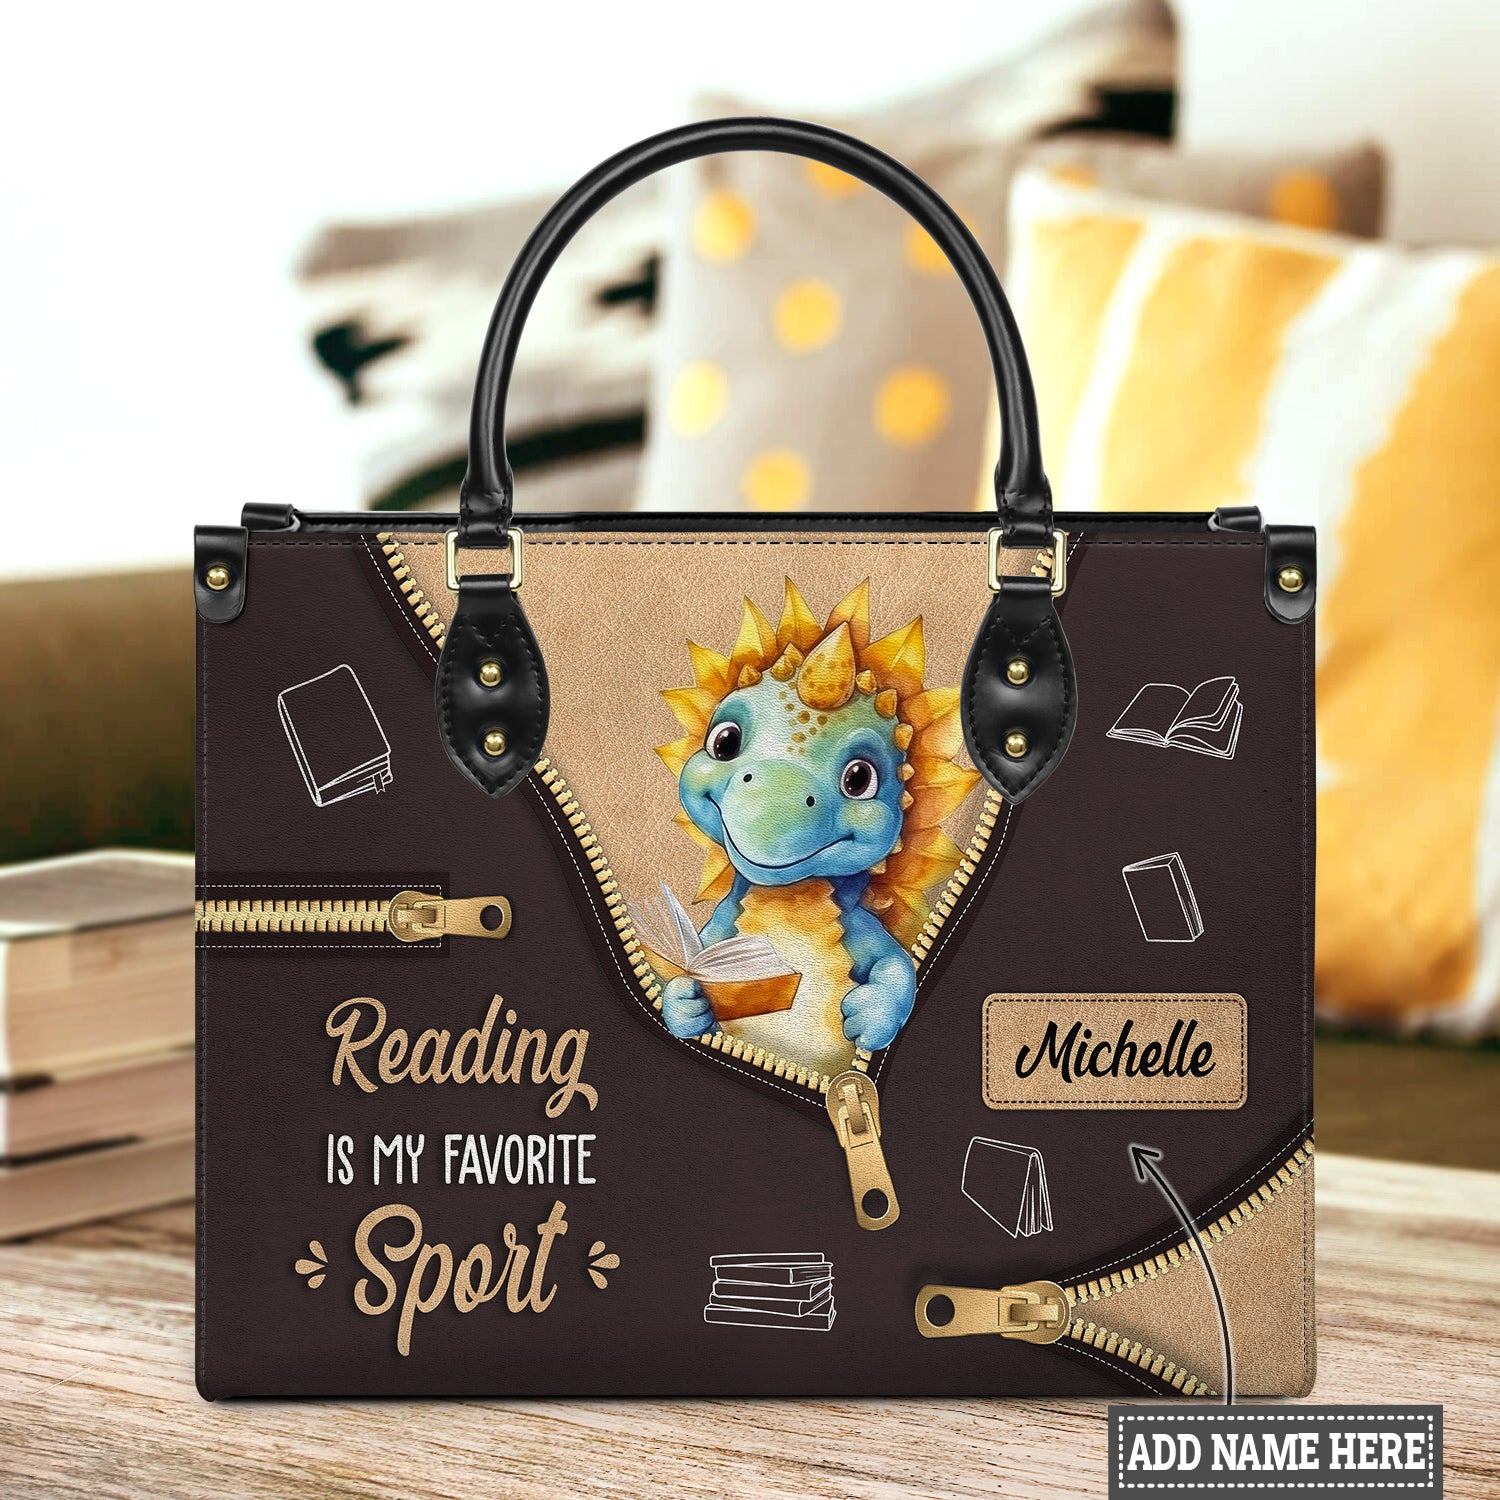 In A World Of Bookworms Be A Book Dragon DNRZ100723684 Zip Around Leat -  The Note Bags